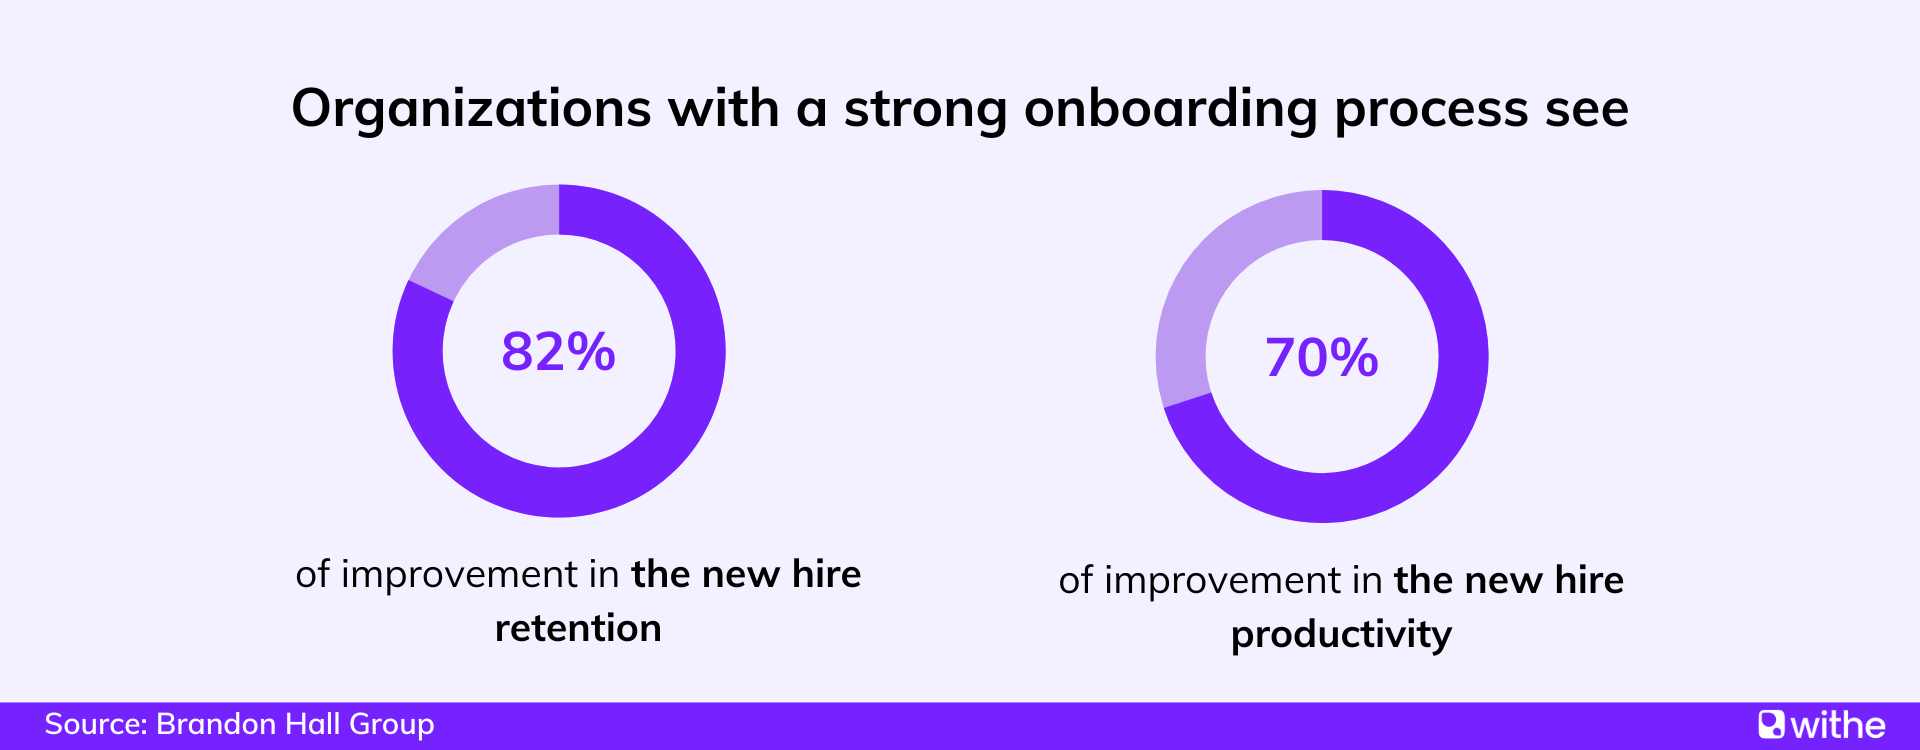 Employee onboarding statistics - the benefits of having a strong onboarding process